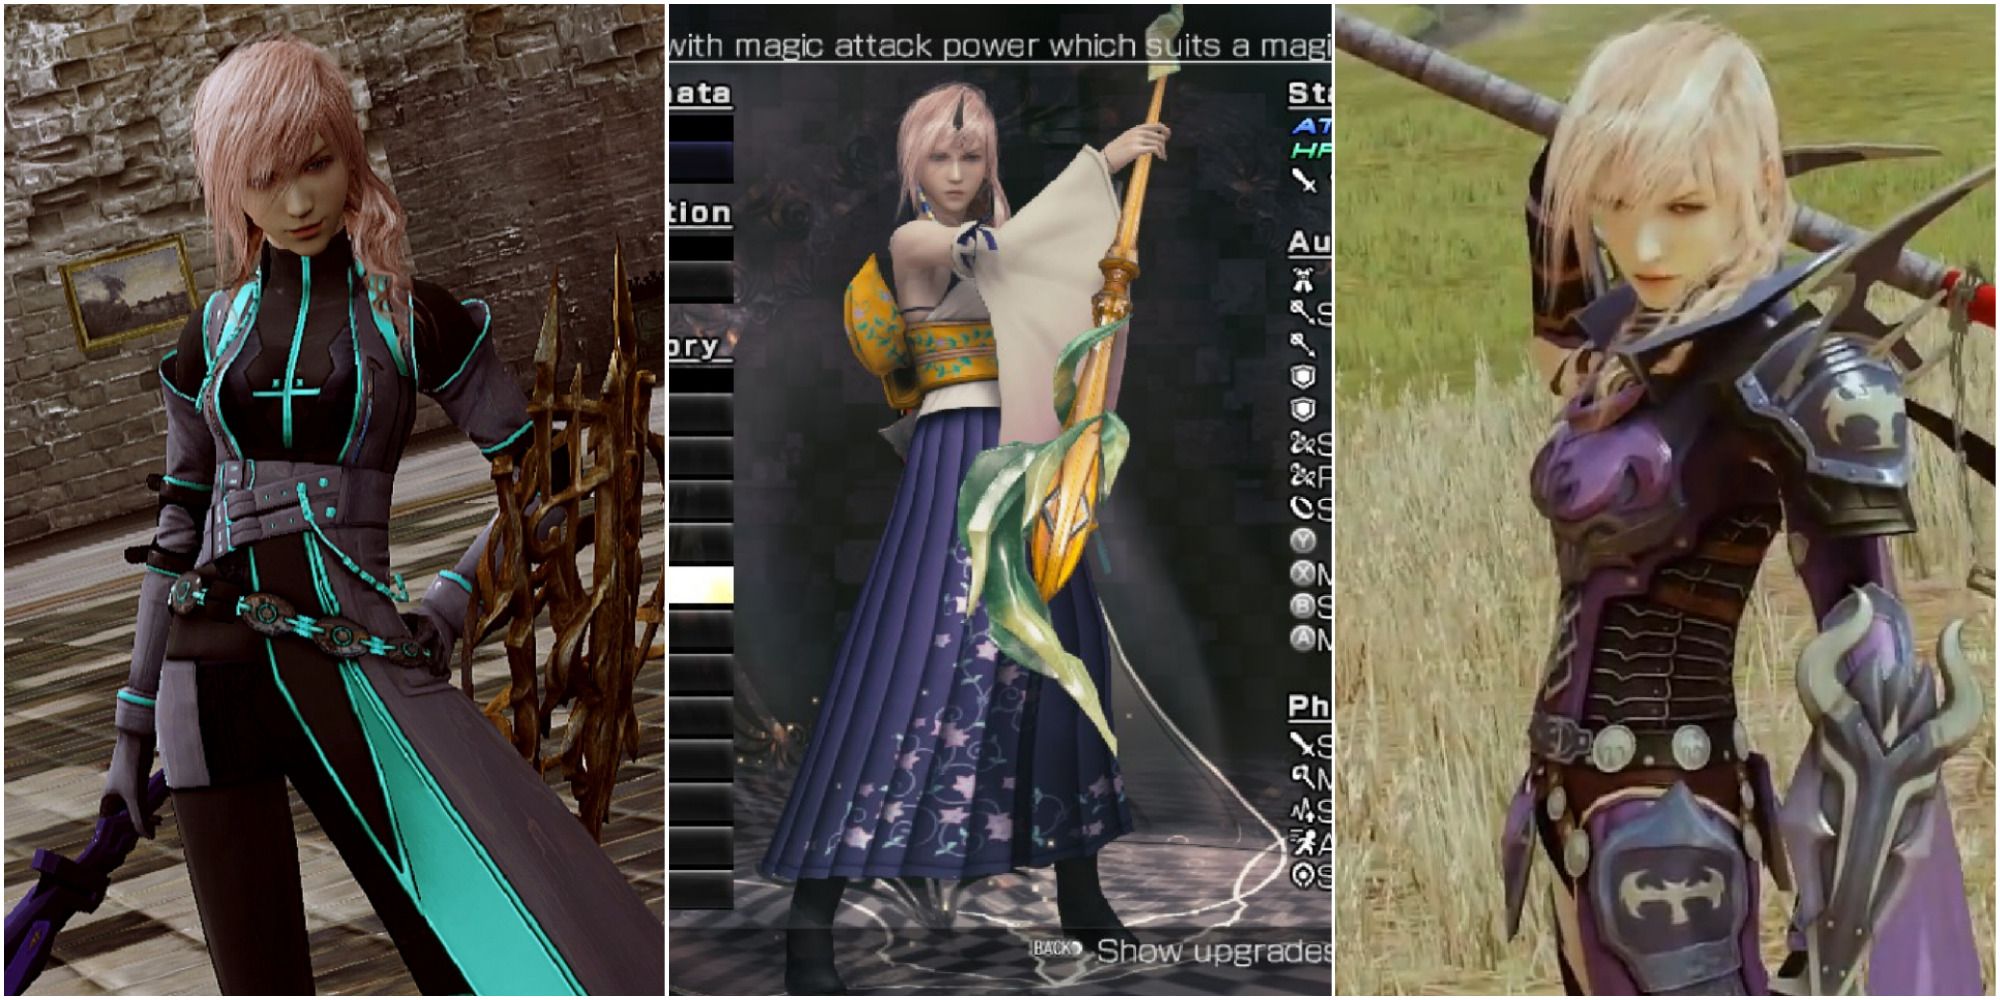 A collage of images from Lightning Returns: Final Fantasy 13, showing Lightning wearing different outfits